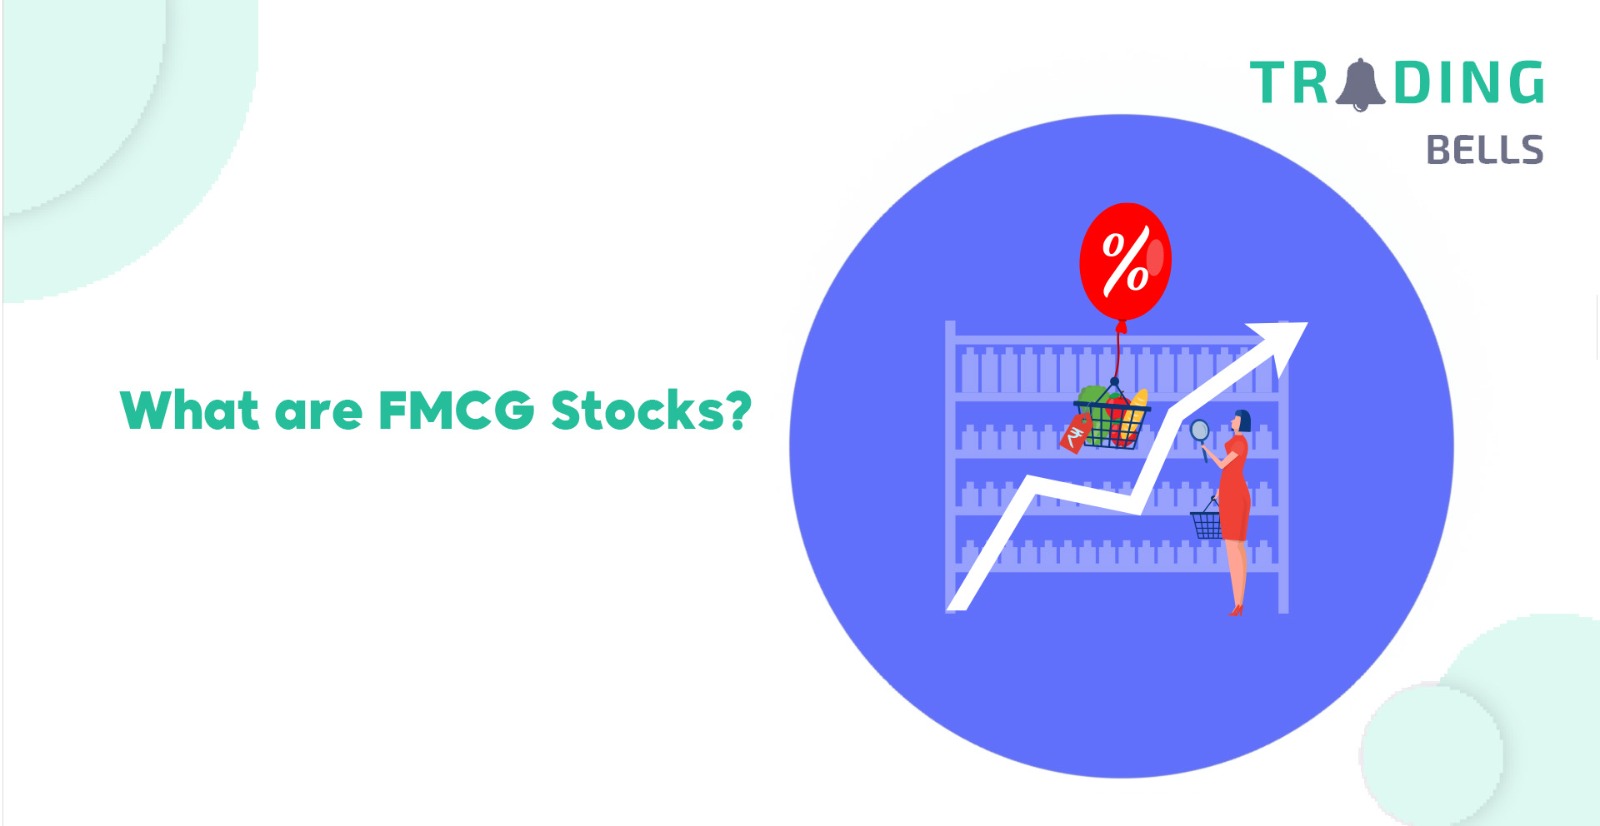 What are FMCG Stocks